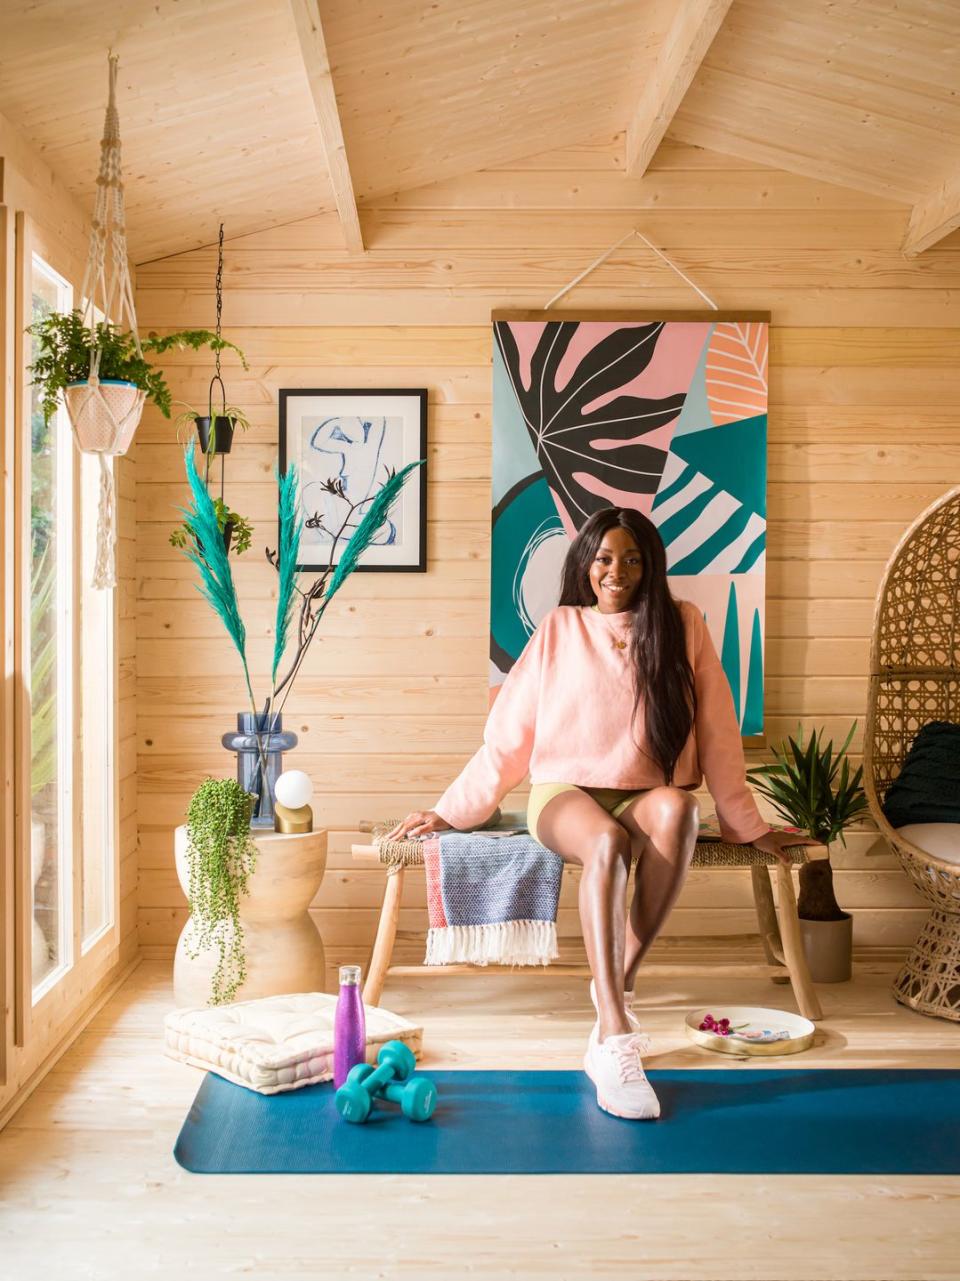 <p>'It was a must-have for me to have a space where I could unwind & do post workout stretches,' explains AJ. 'I'm planning to add some more gym equipment to maximise my workout area but I also want to incorporate a little bar area for summer BBQs – it's all about Yin & Yang.'</p>